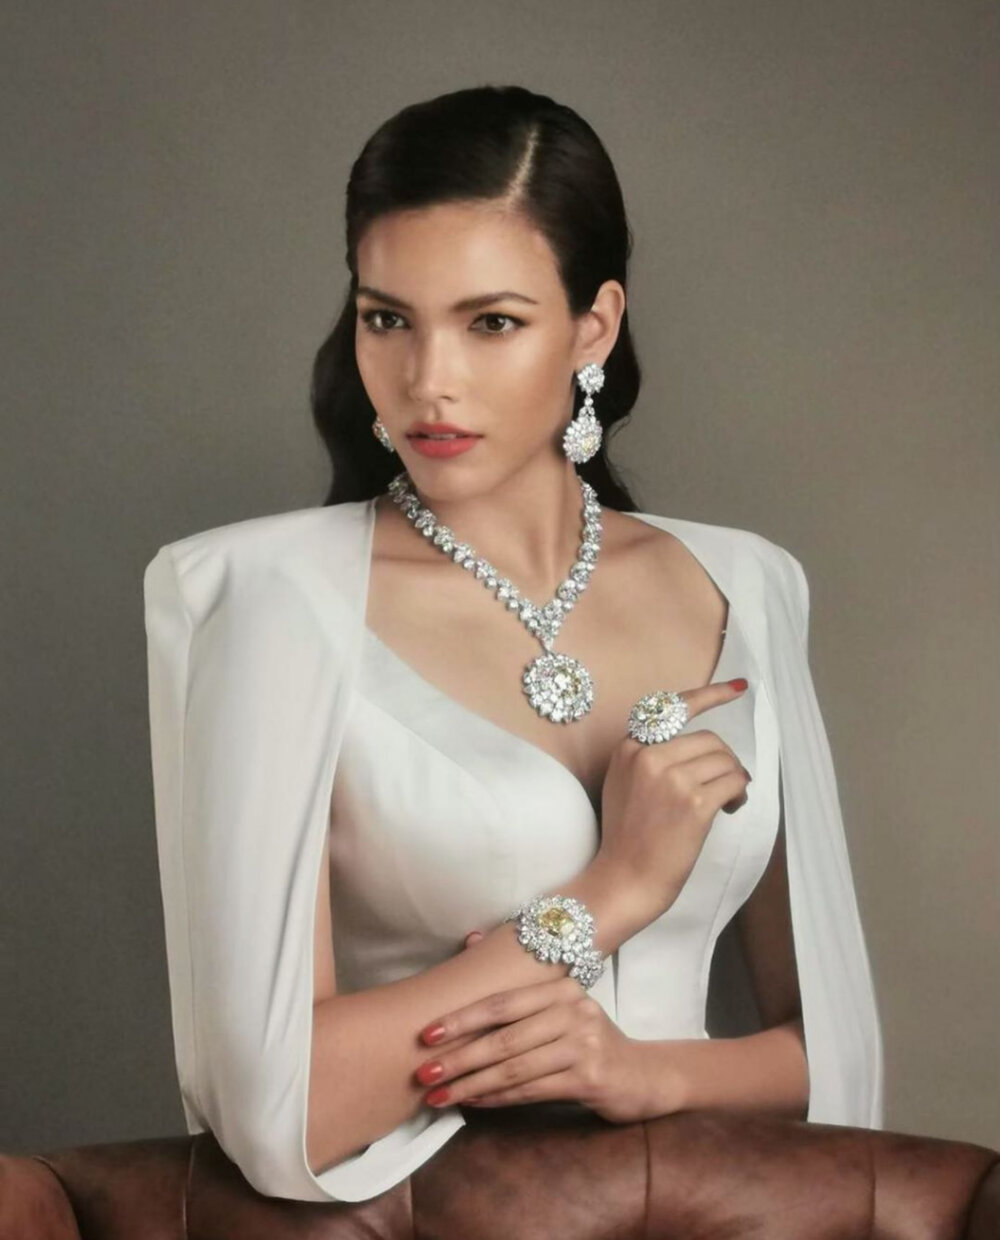  MISS UNIVERSE THAILAND, Fahsai Paweensuda wears the historic Mouawad Dragon diamond suite that Reena had the privilege to paint. It's the world’s largest Round Brilliant Fancy Vivid Yellow Diamond. The suit was unveiled at Mouawad Gala in Bangkok. 